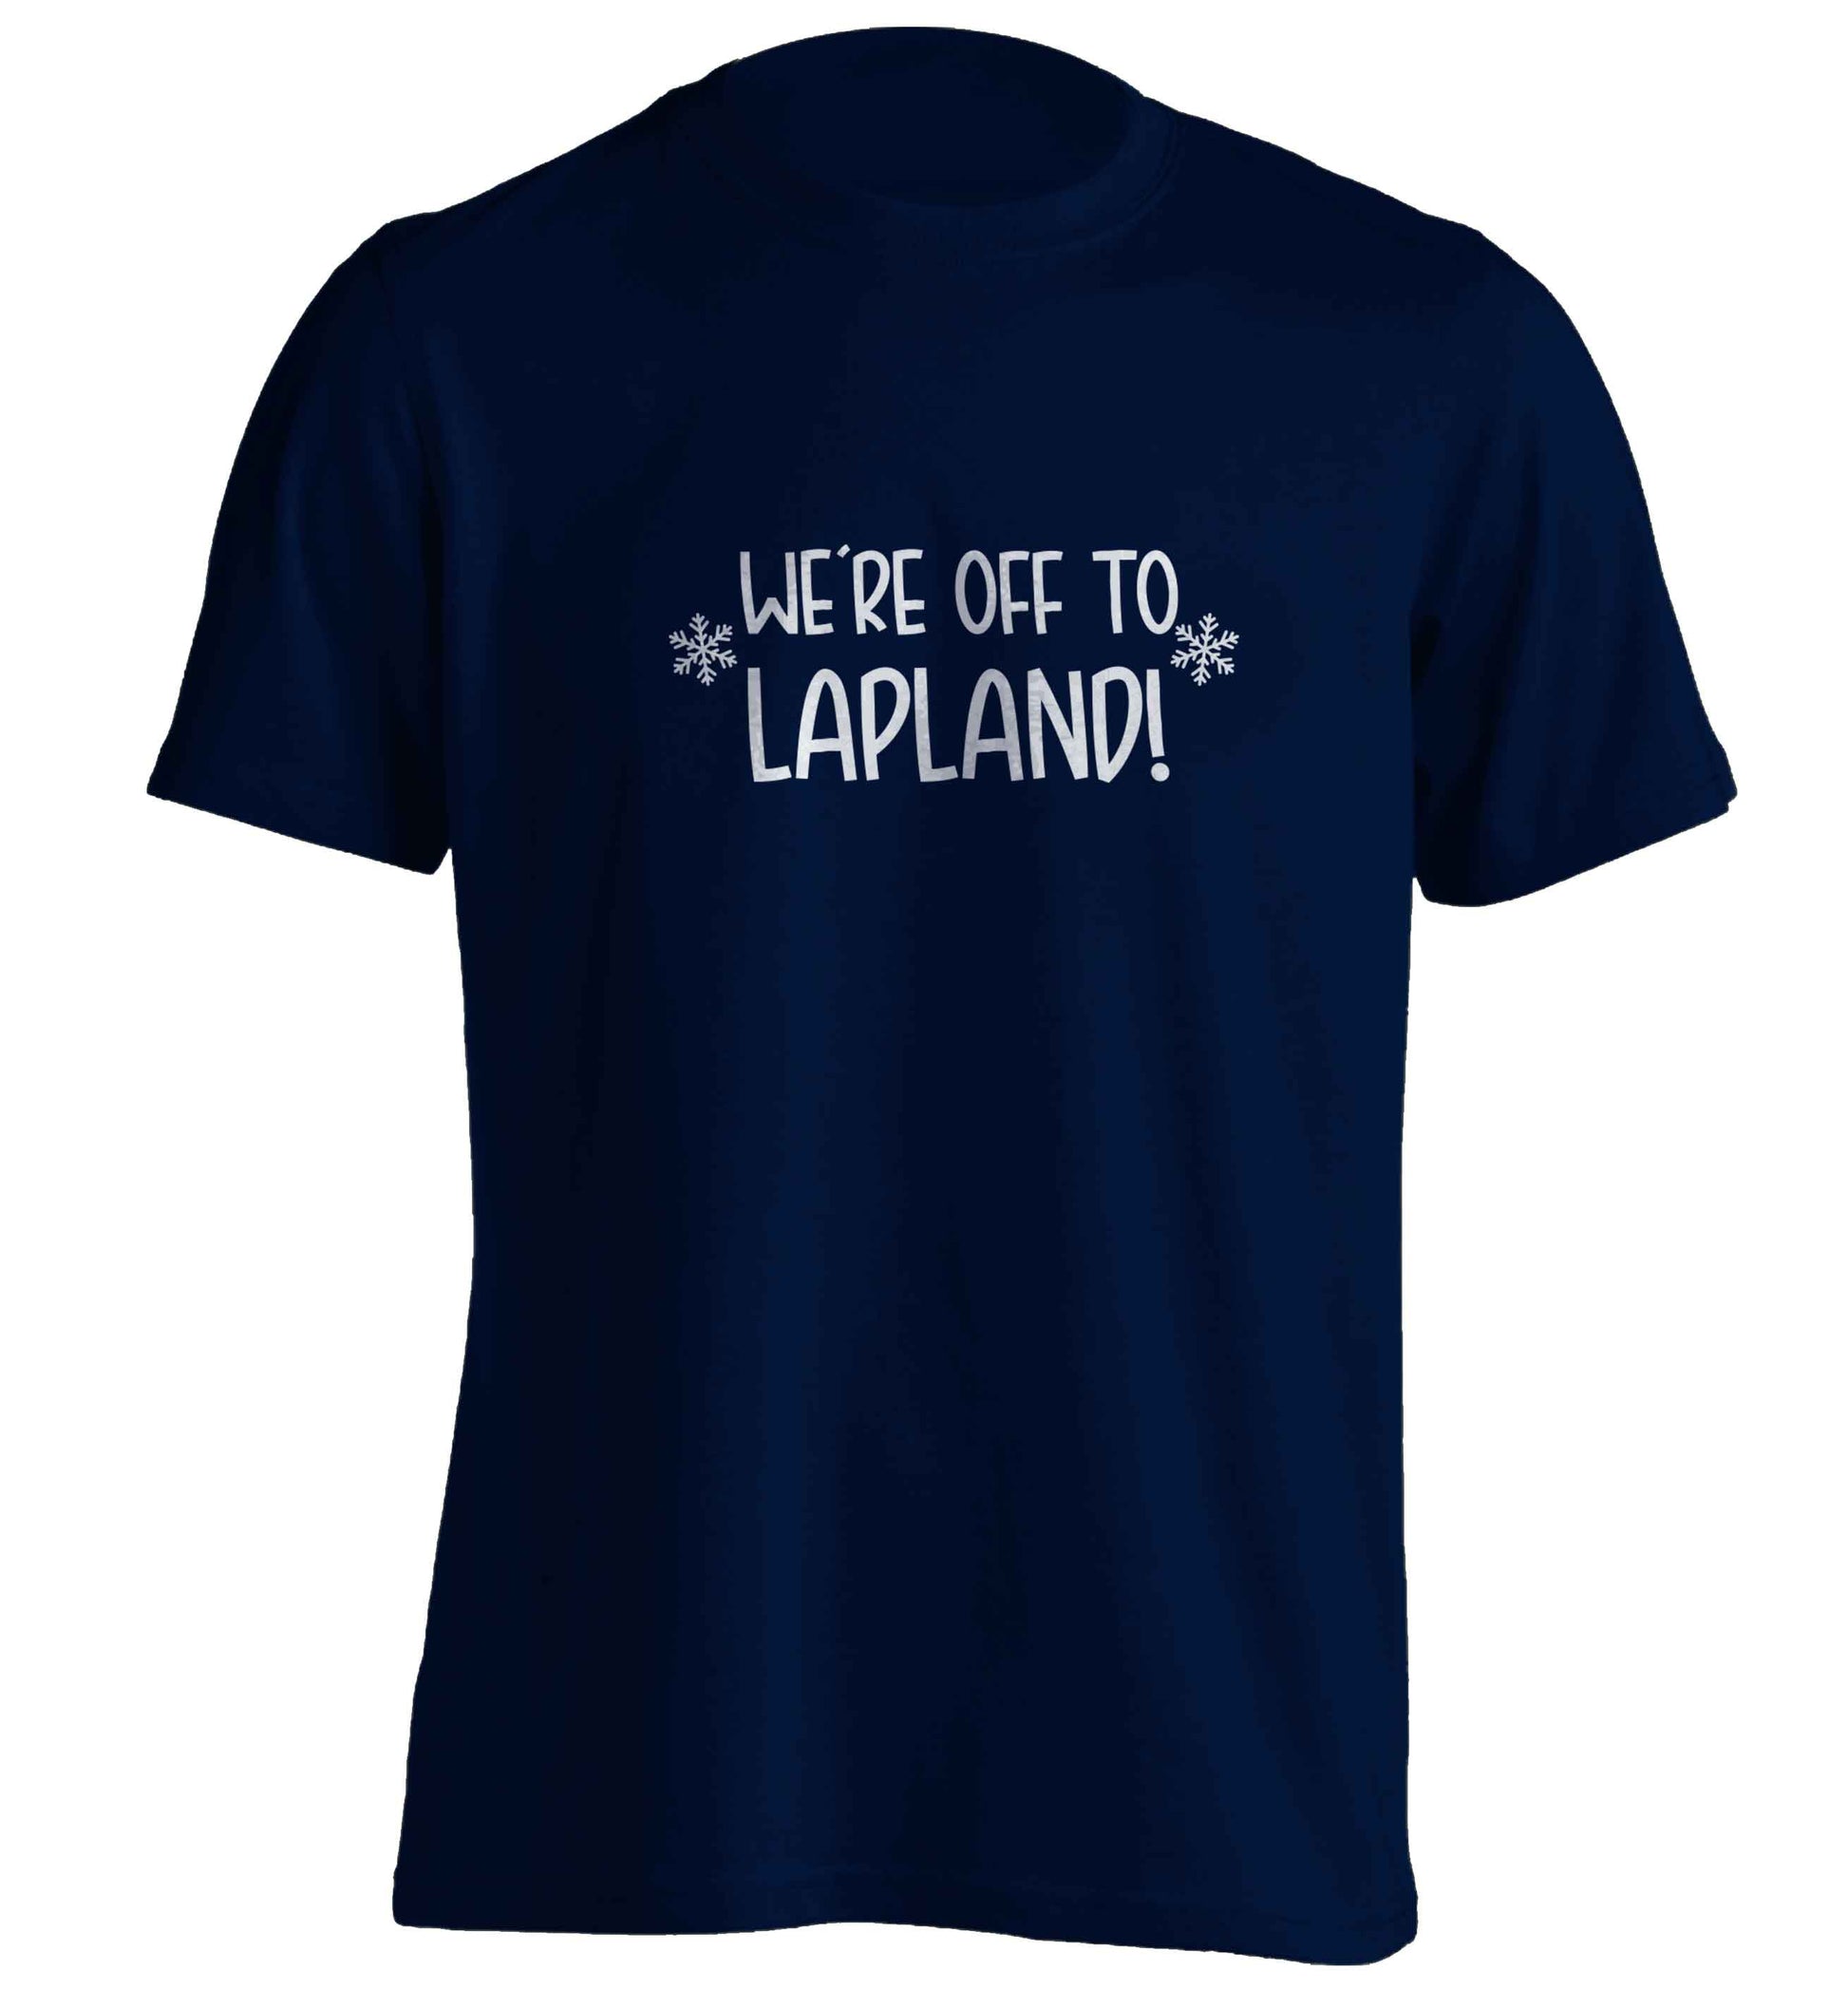 We're off to Lapland adults unisex navy Tshirt 2XL